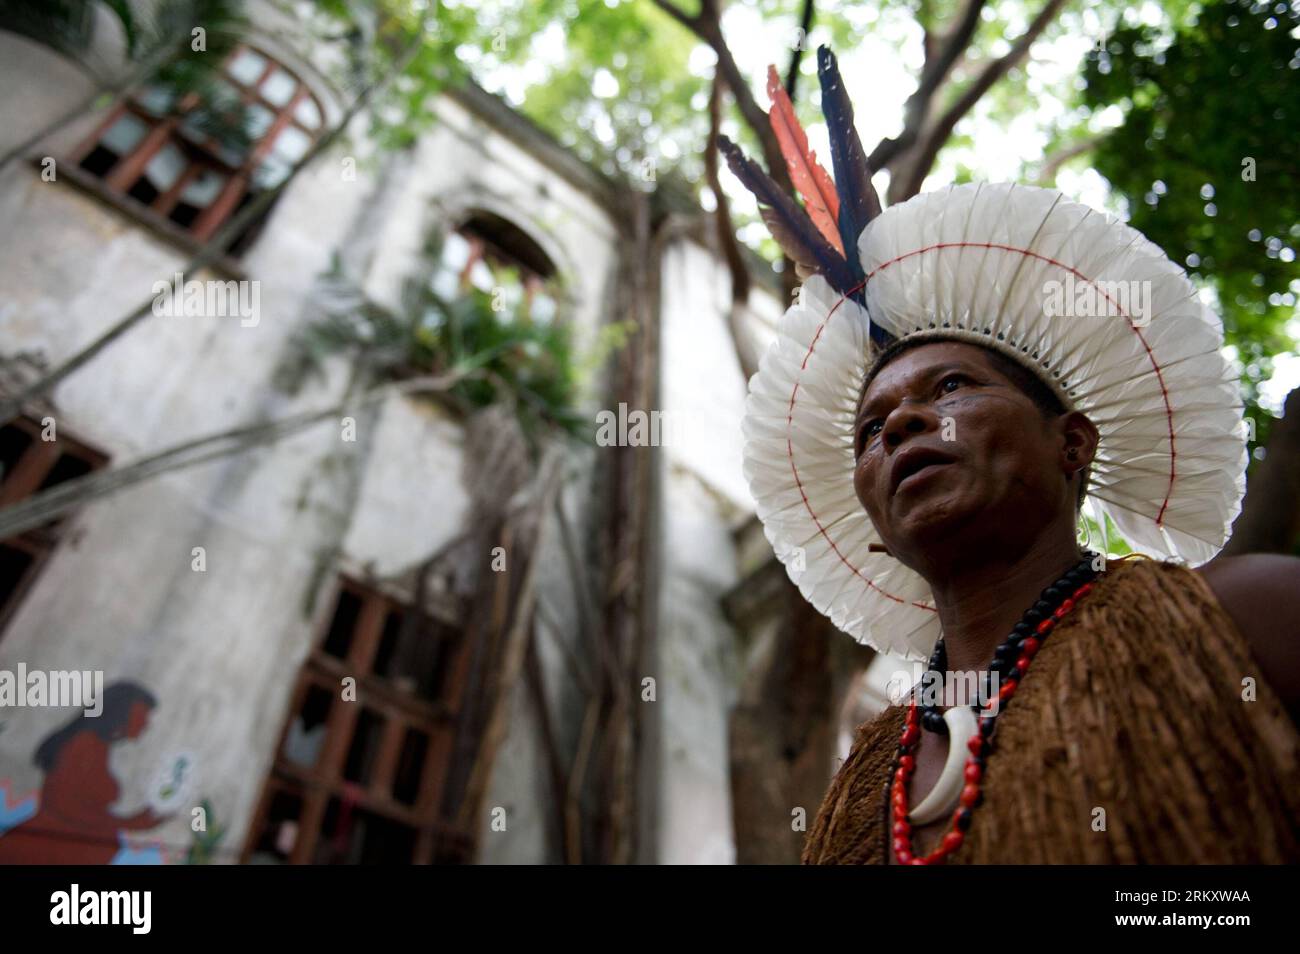 Bildnummer: 59095339  Datum: 16.01.2013  Copyright: imago/Xinhua (130117) -- RIO DE JANEIRO, Jan. 16, 2013 (Xinhua) -- An indigenous man walks outside the old Indian Museum in Rio de Janeiro, Brazil, Jan. 16, 2013. The government of Rio de Janeiro plans to tear down an old Indian museum beside Maracana Stadium to build parking lot and shopping center here for the upcoming Brazil 2014 FIFA World Cup. The plan met with protest from the indigenous groups. Now Indians from 17 tribes around Brazil settle down in the old building, appealing for the protection of the century-old museum, the oldest In Stock Photo